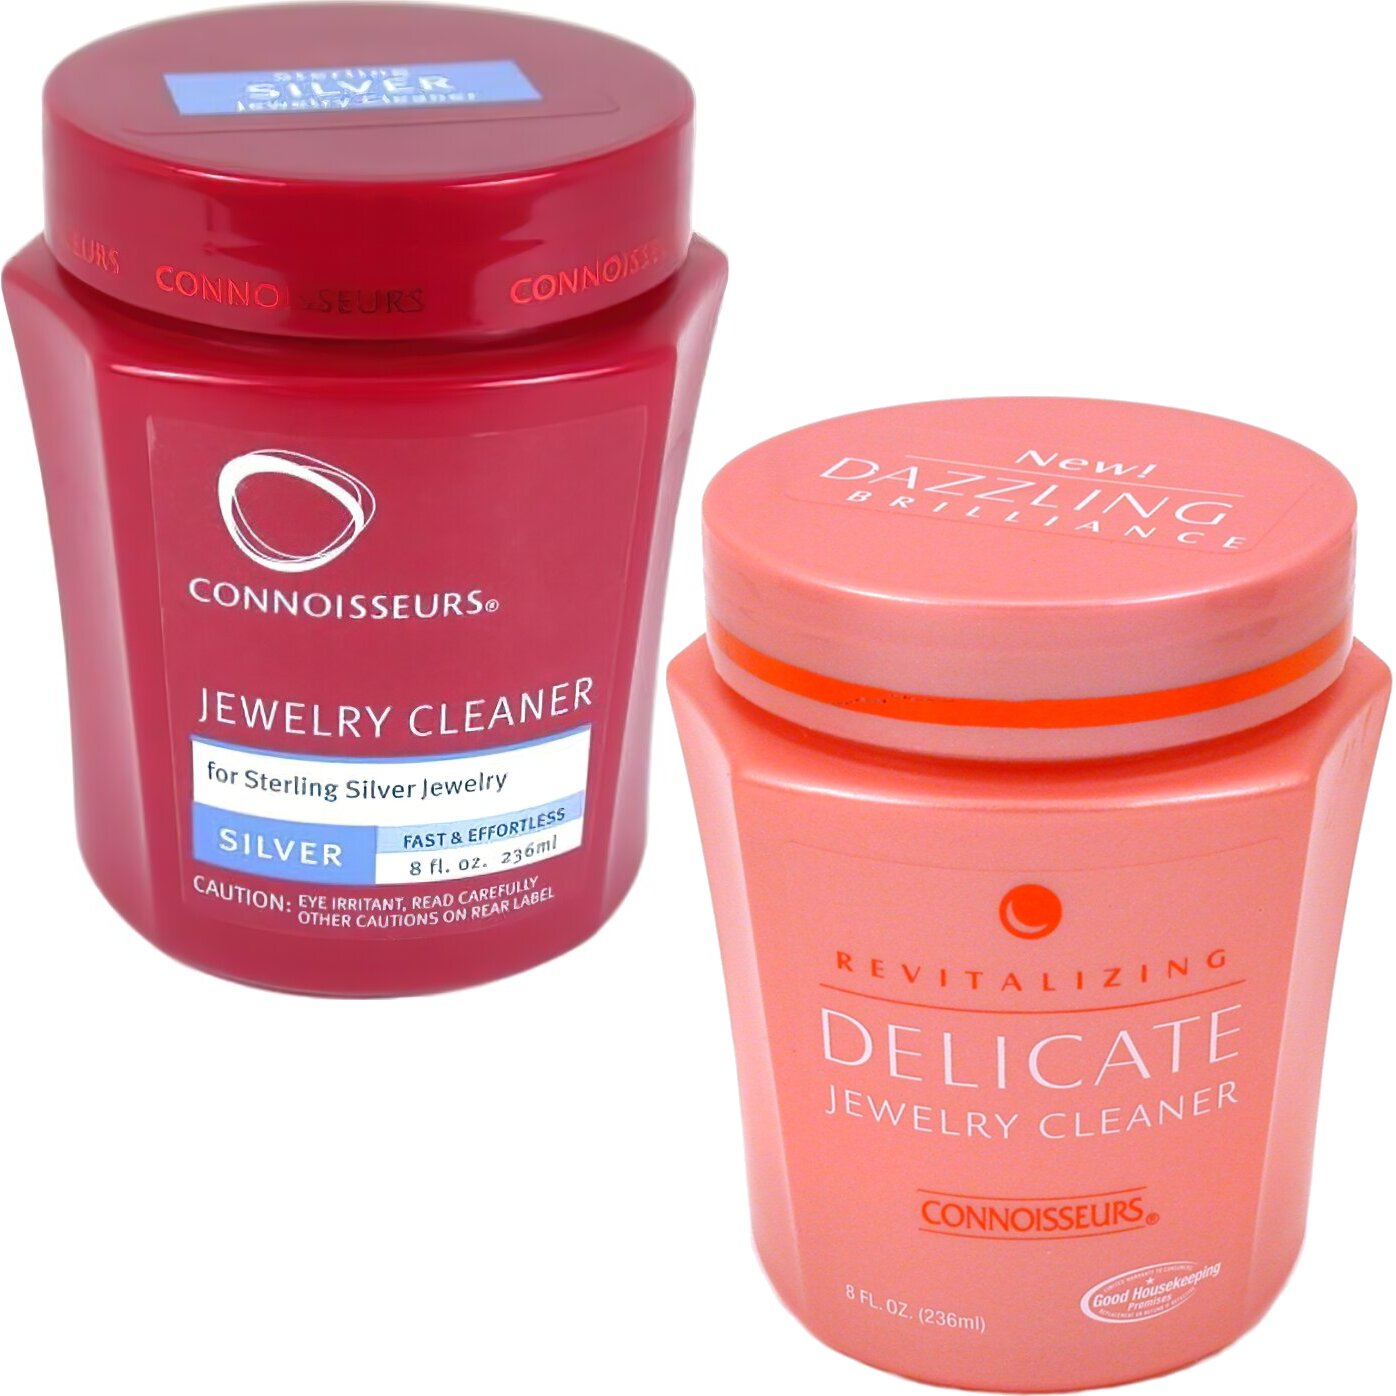 Connoisseurs Delicate & Silver Revitalizing Jewelry Cleaner Kit 2 Pcs